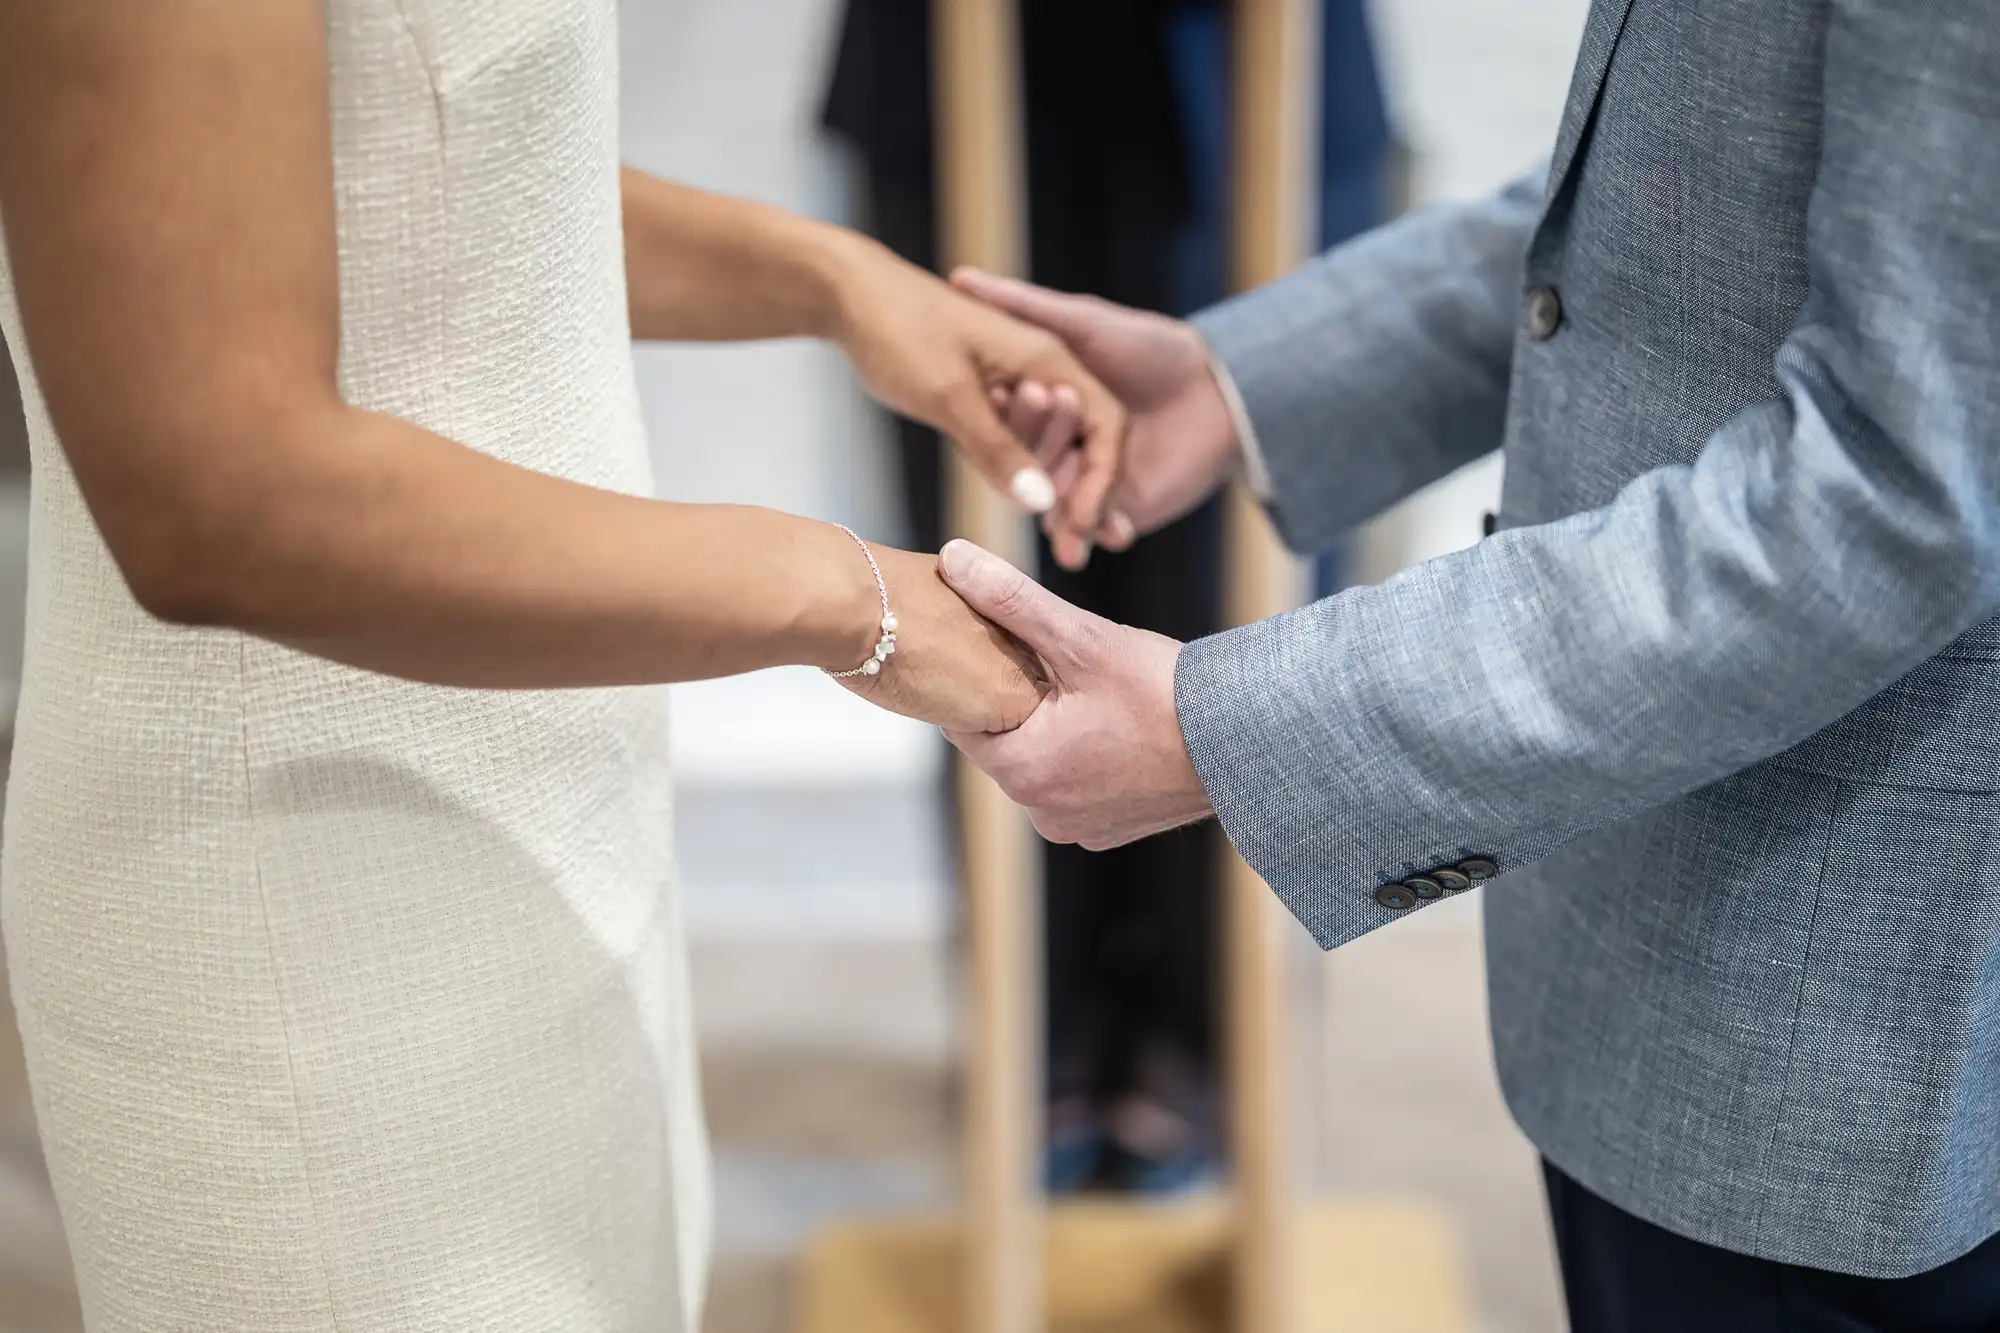 Two people facing each other and holding hands during a wedding ceremony. The person on the left wears a white dress, and the person on the right wears a light gray suit.